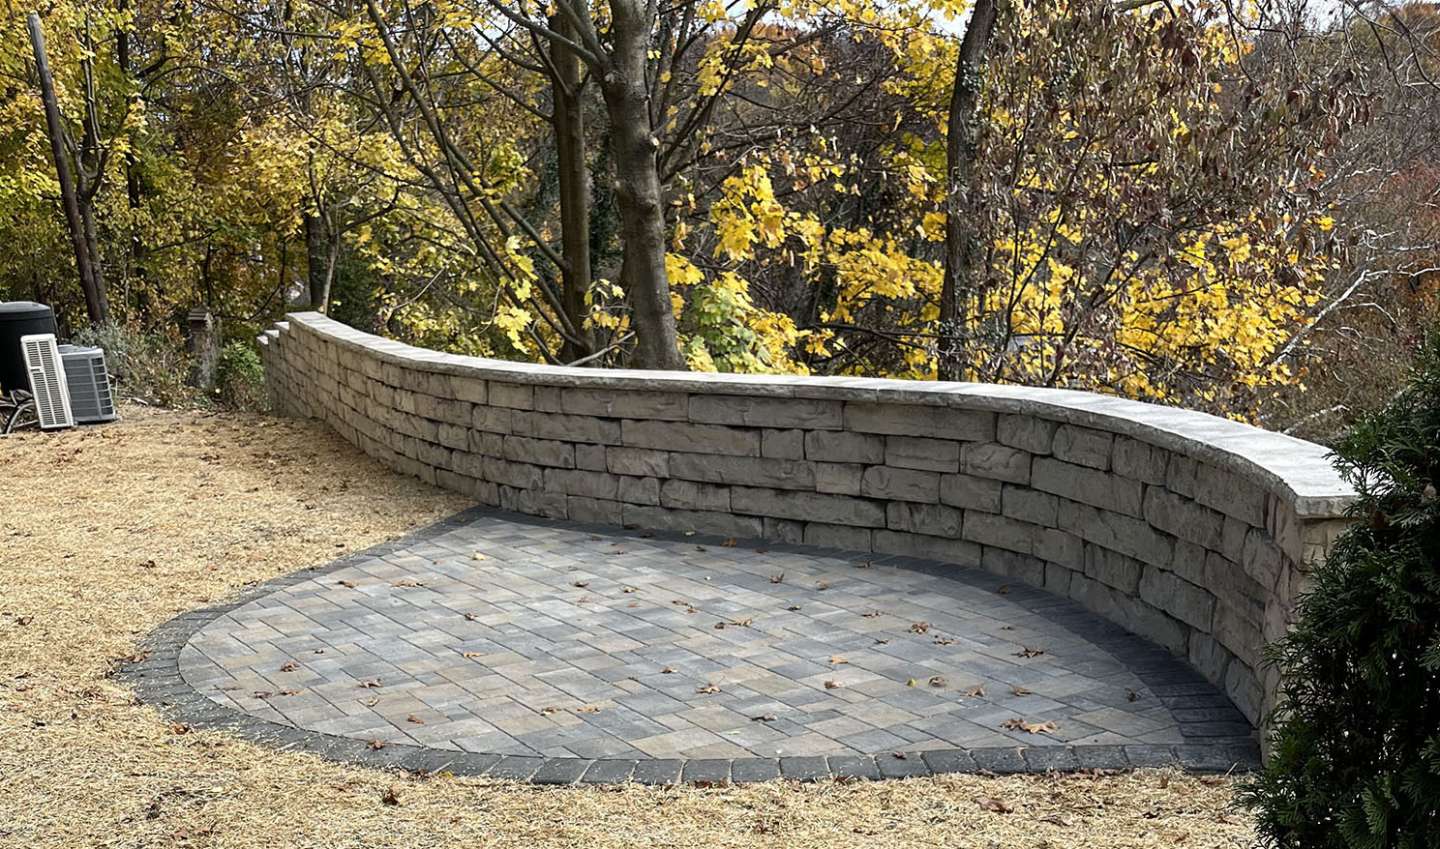 Patio and Wall in Edgewood, PA - Hardscaping Materials and Installation